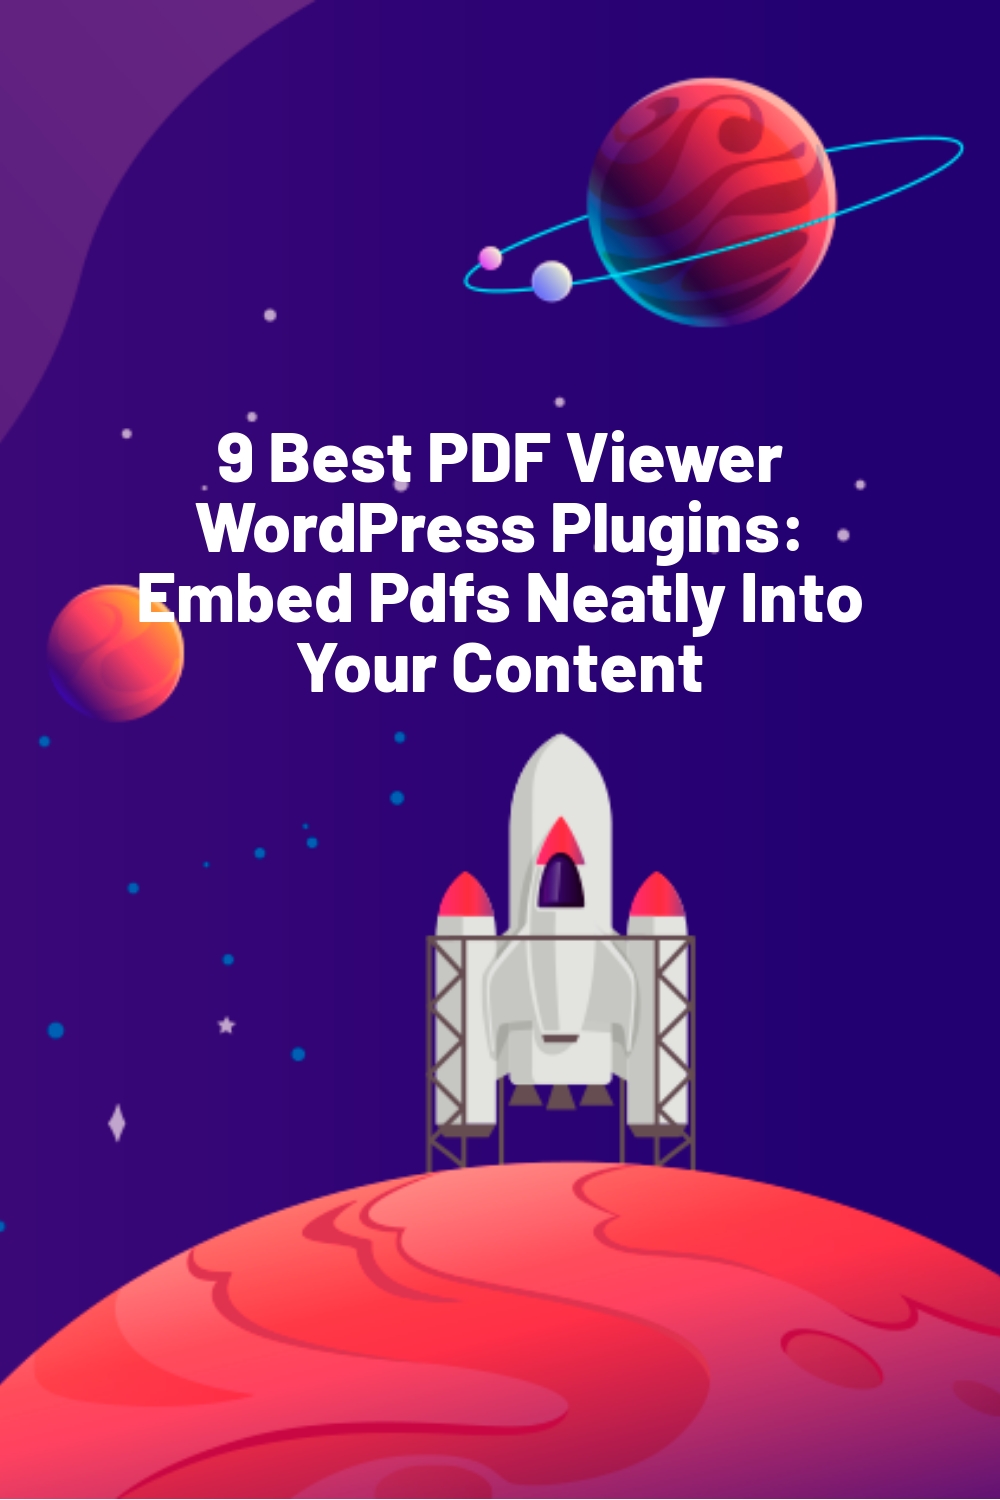 9 Best PDF Viewer WordPress Plugins: Embed Pdfs Neatly Into Your Content